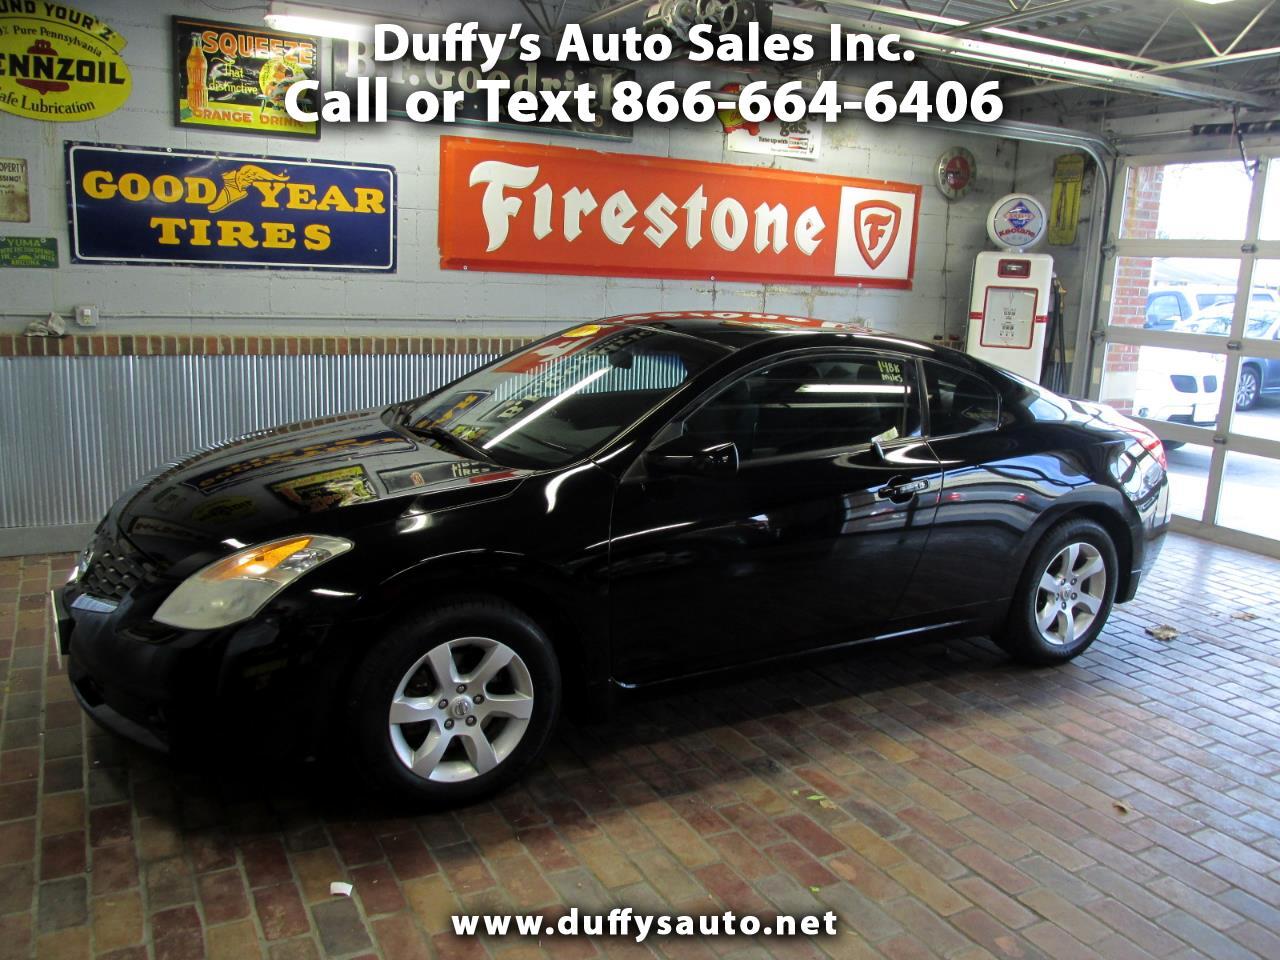 Used 2008 Nissan Altima 2dr Cpe I4 Man 2 5 S For Sale In